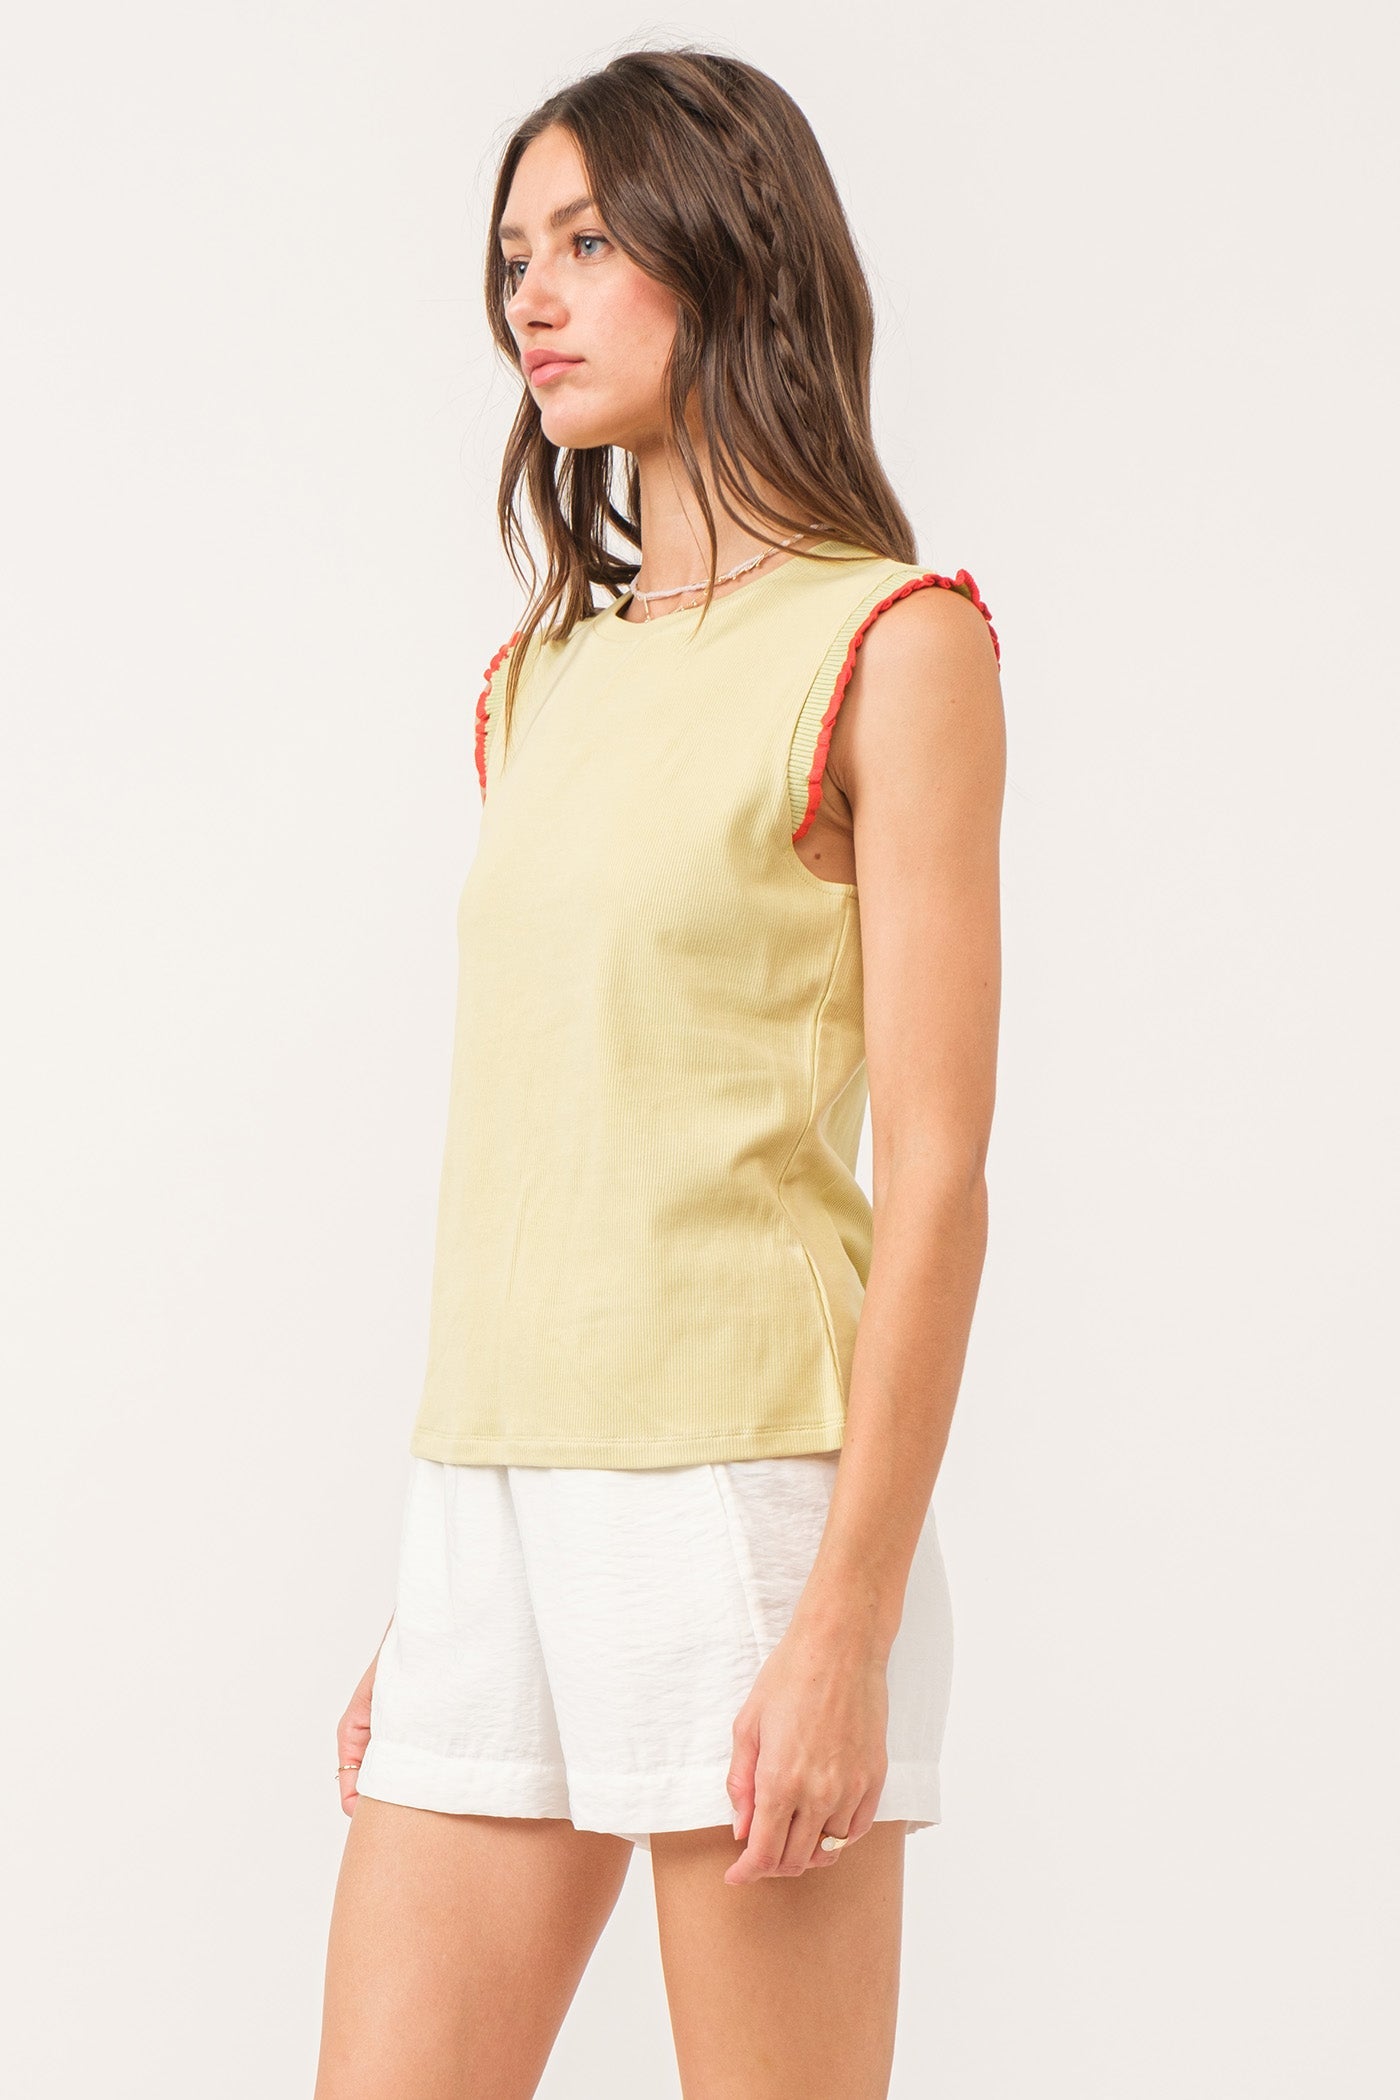 gretchen-ribbed-ruffle-top-pear